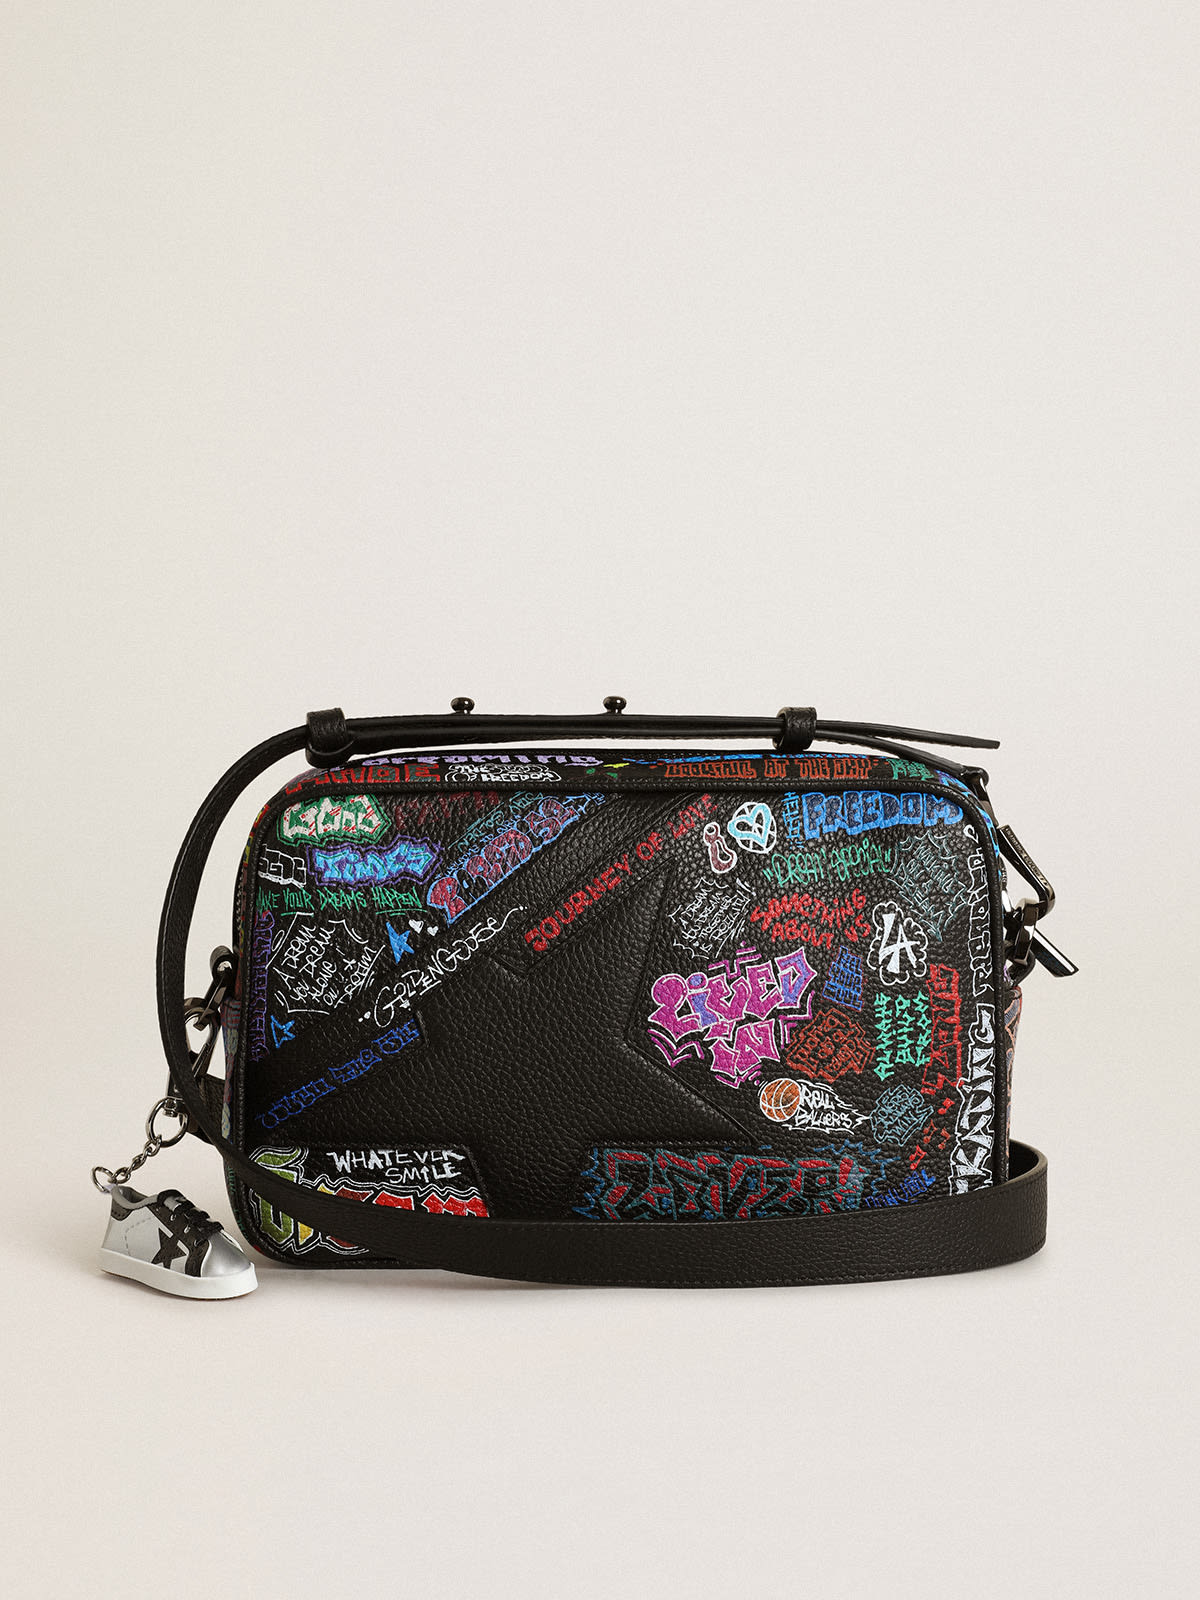 Golden Goose - Women's Star Bag in black hammered leather with multicolor print in 